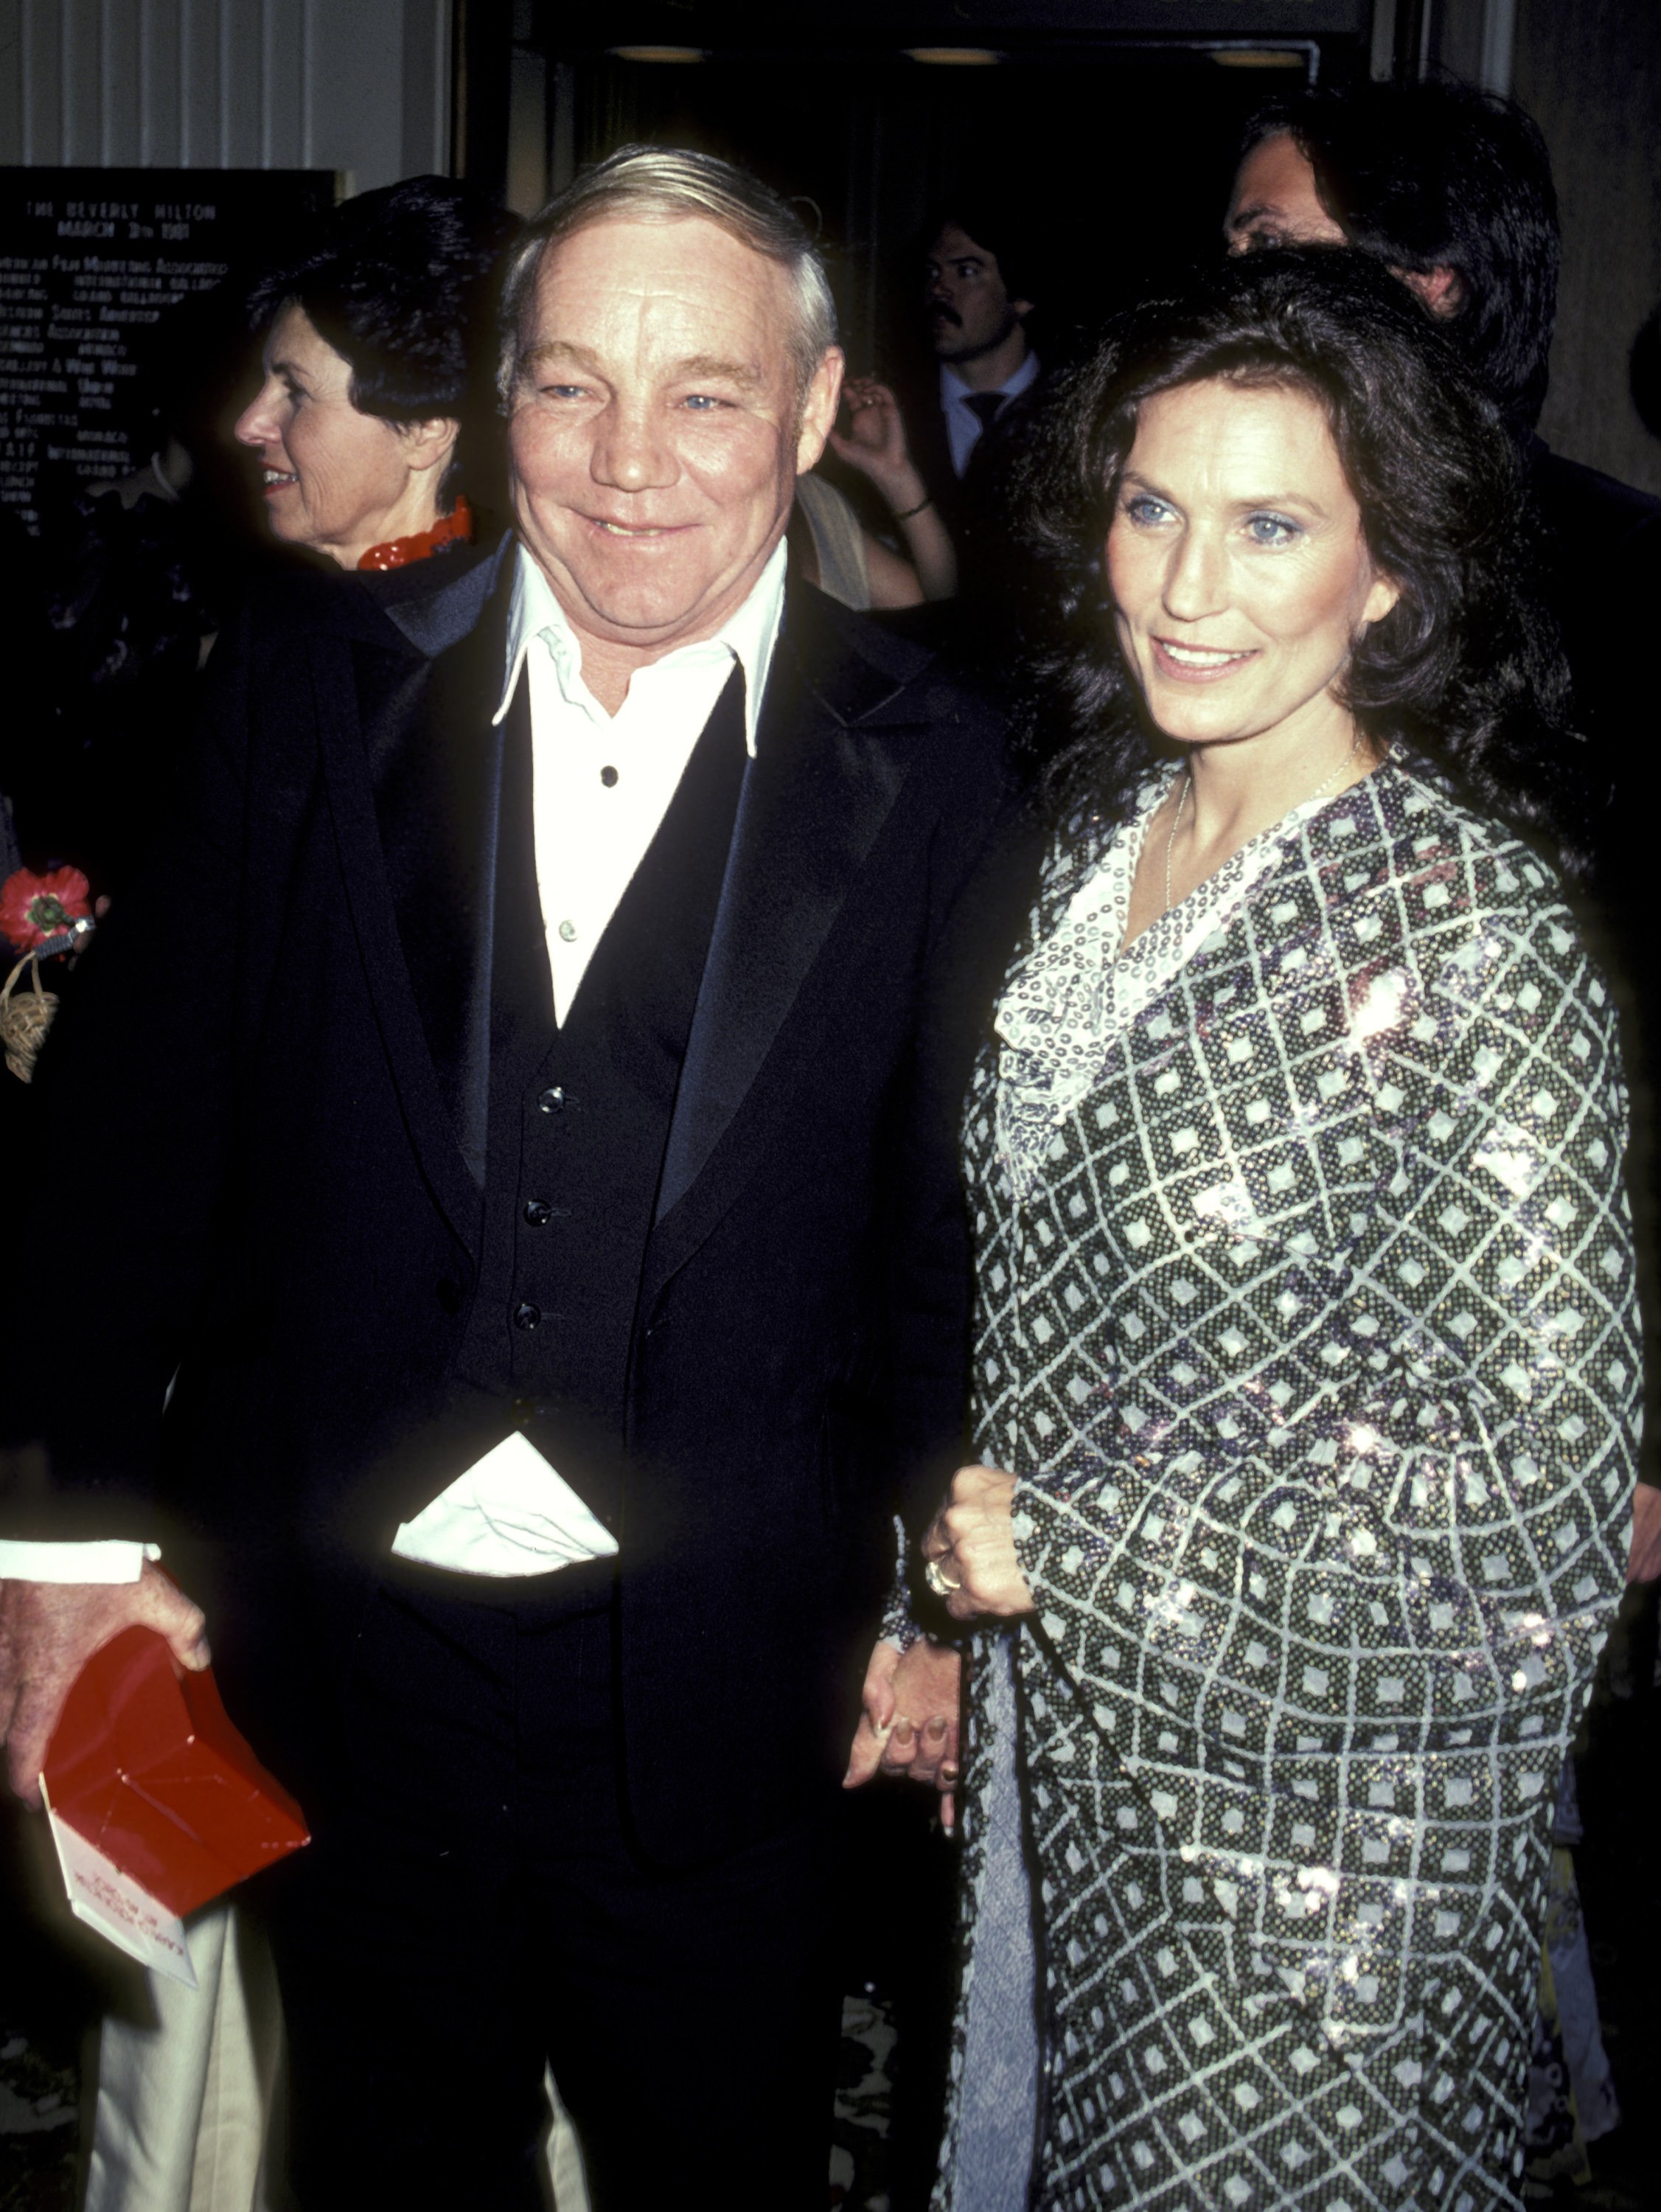 Loretta Lynn and husband Oliver Mooney' Lynn, Jr. during 53rd Annual Academy Awards' Governor's Ball at Beverly Hilton Hotel in Beverly Hills, California, United States | Source: Getty Images